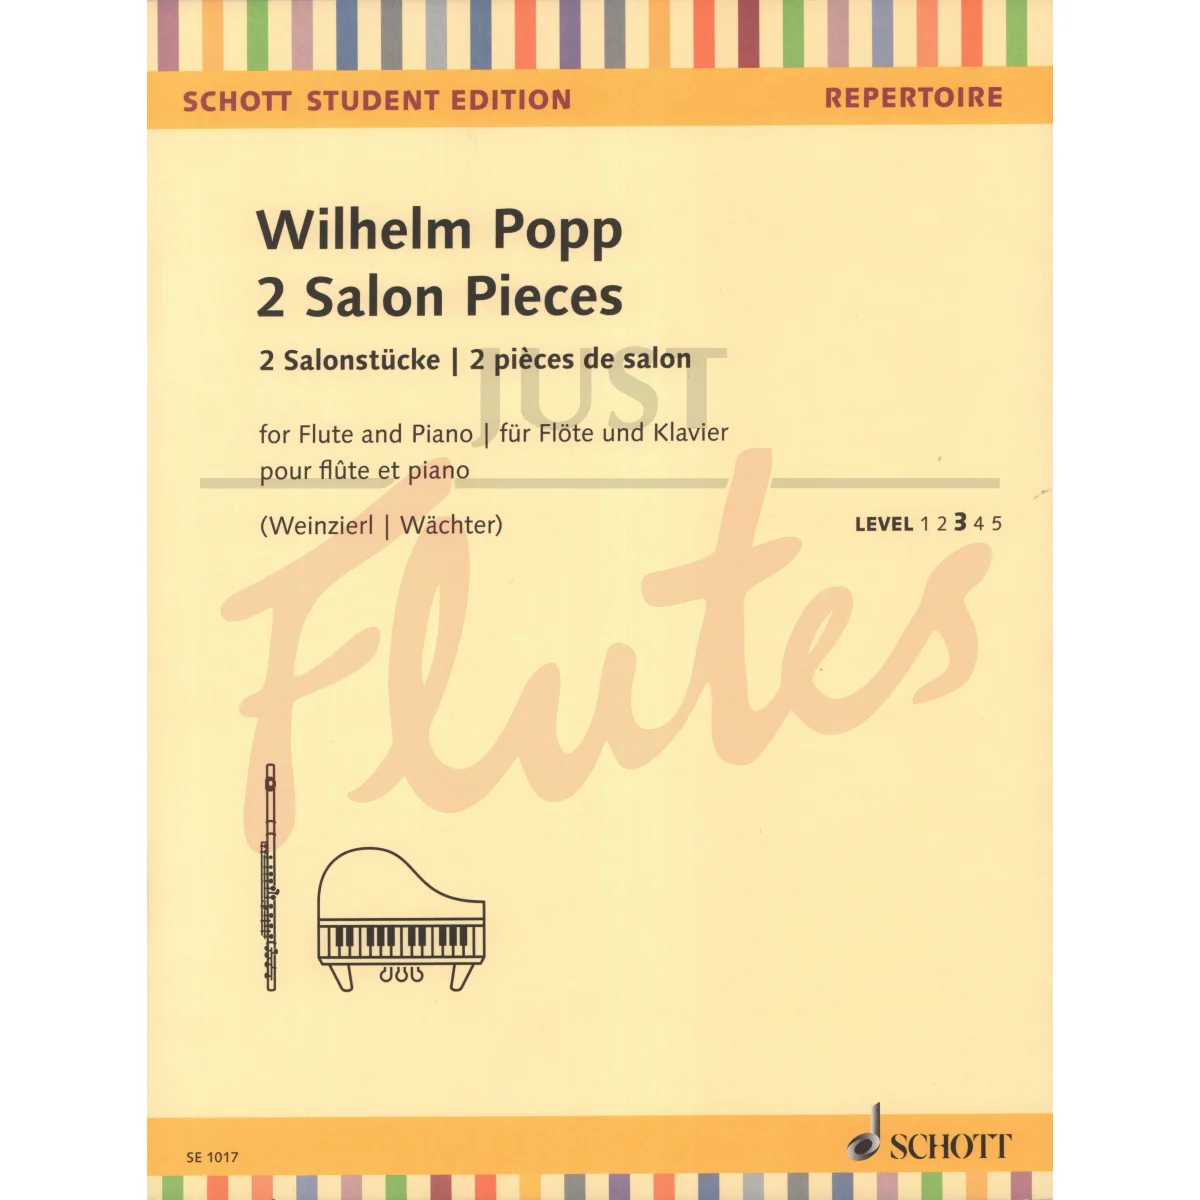 2 Salon Pieces for Flute and Piano